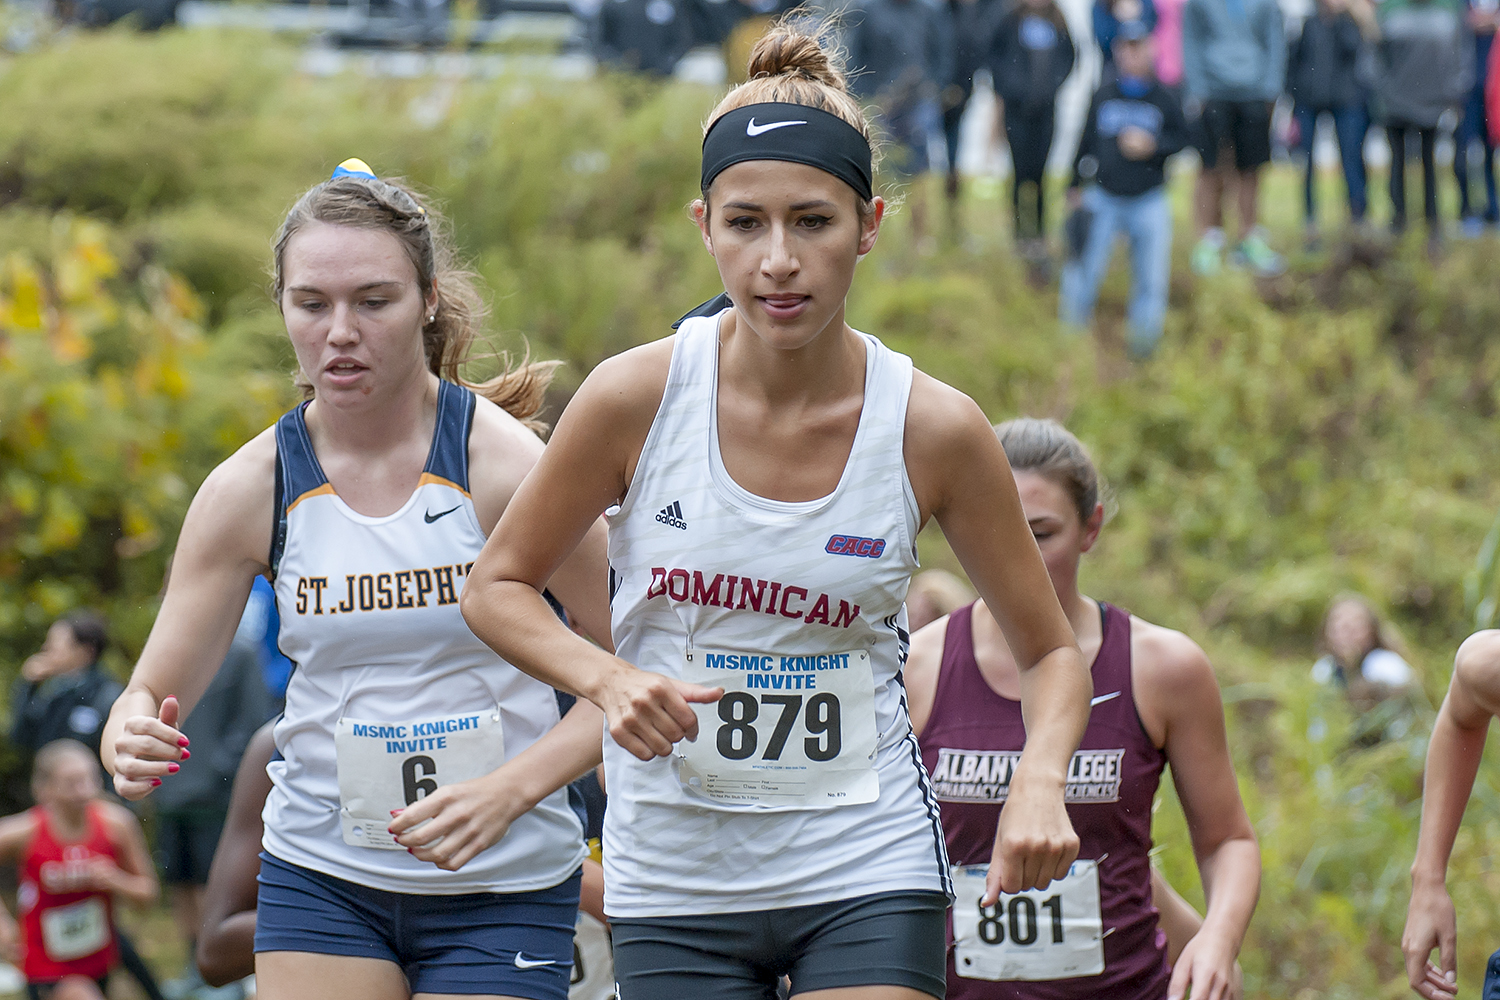 The women's cross country team finished in eighth place at the Purchase College Invitational